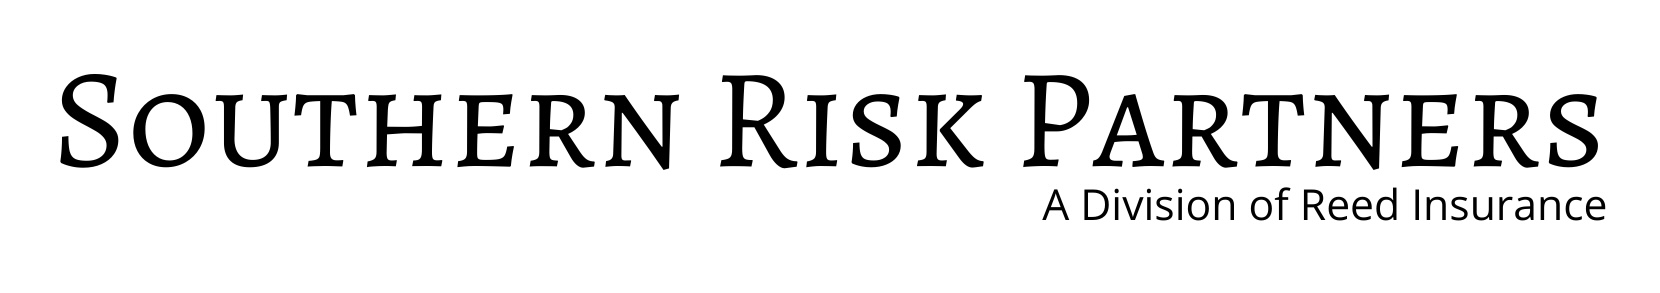 Southern Risk Partners long and narrow